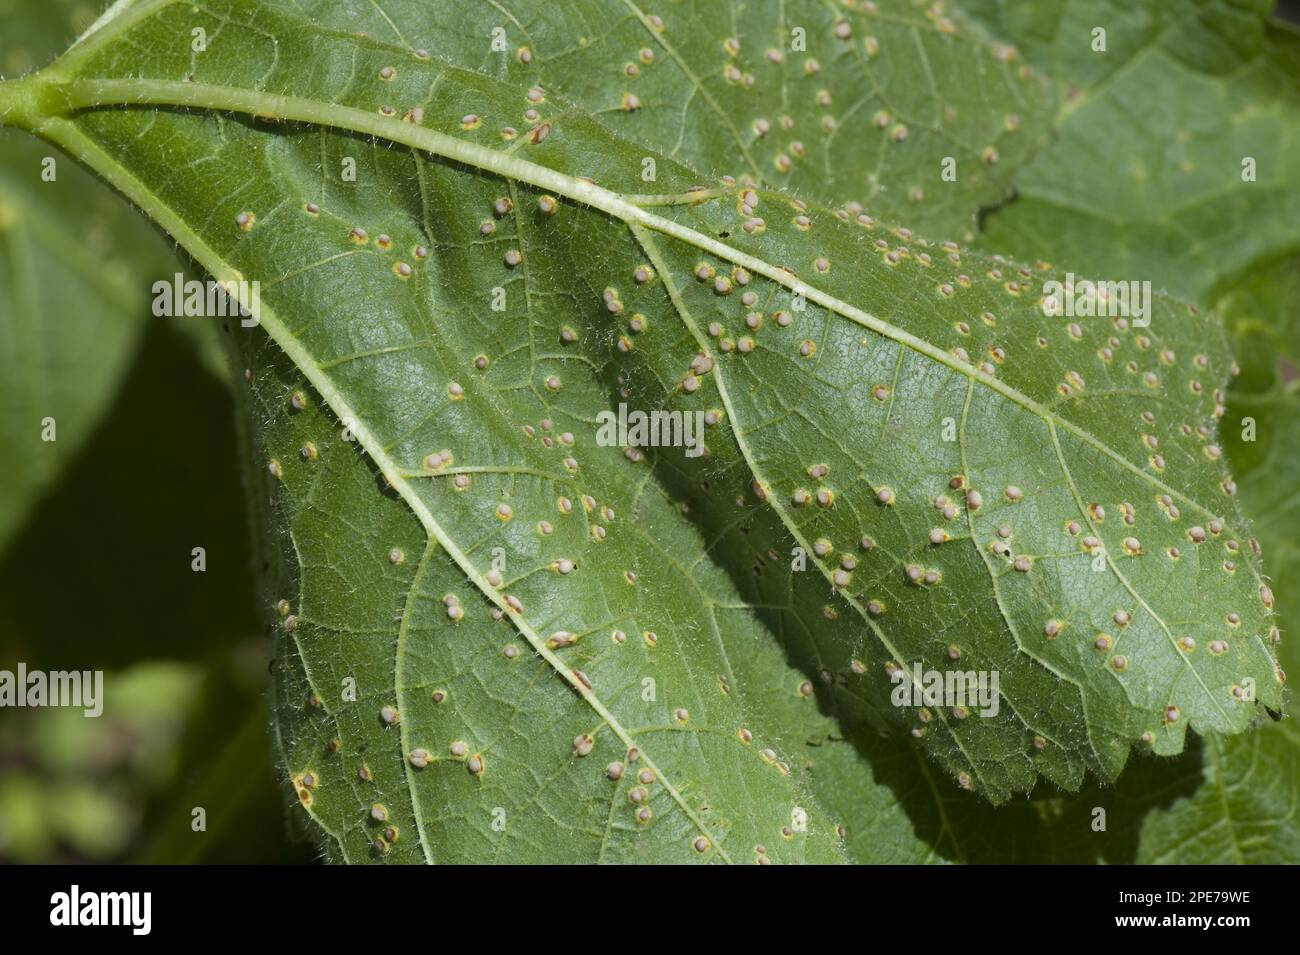 Holly rust, Puccinia malvacearum, early pustules on the underside of a holly leaf Stock Photo